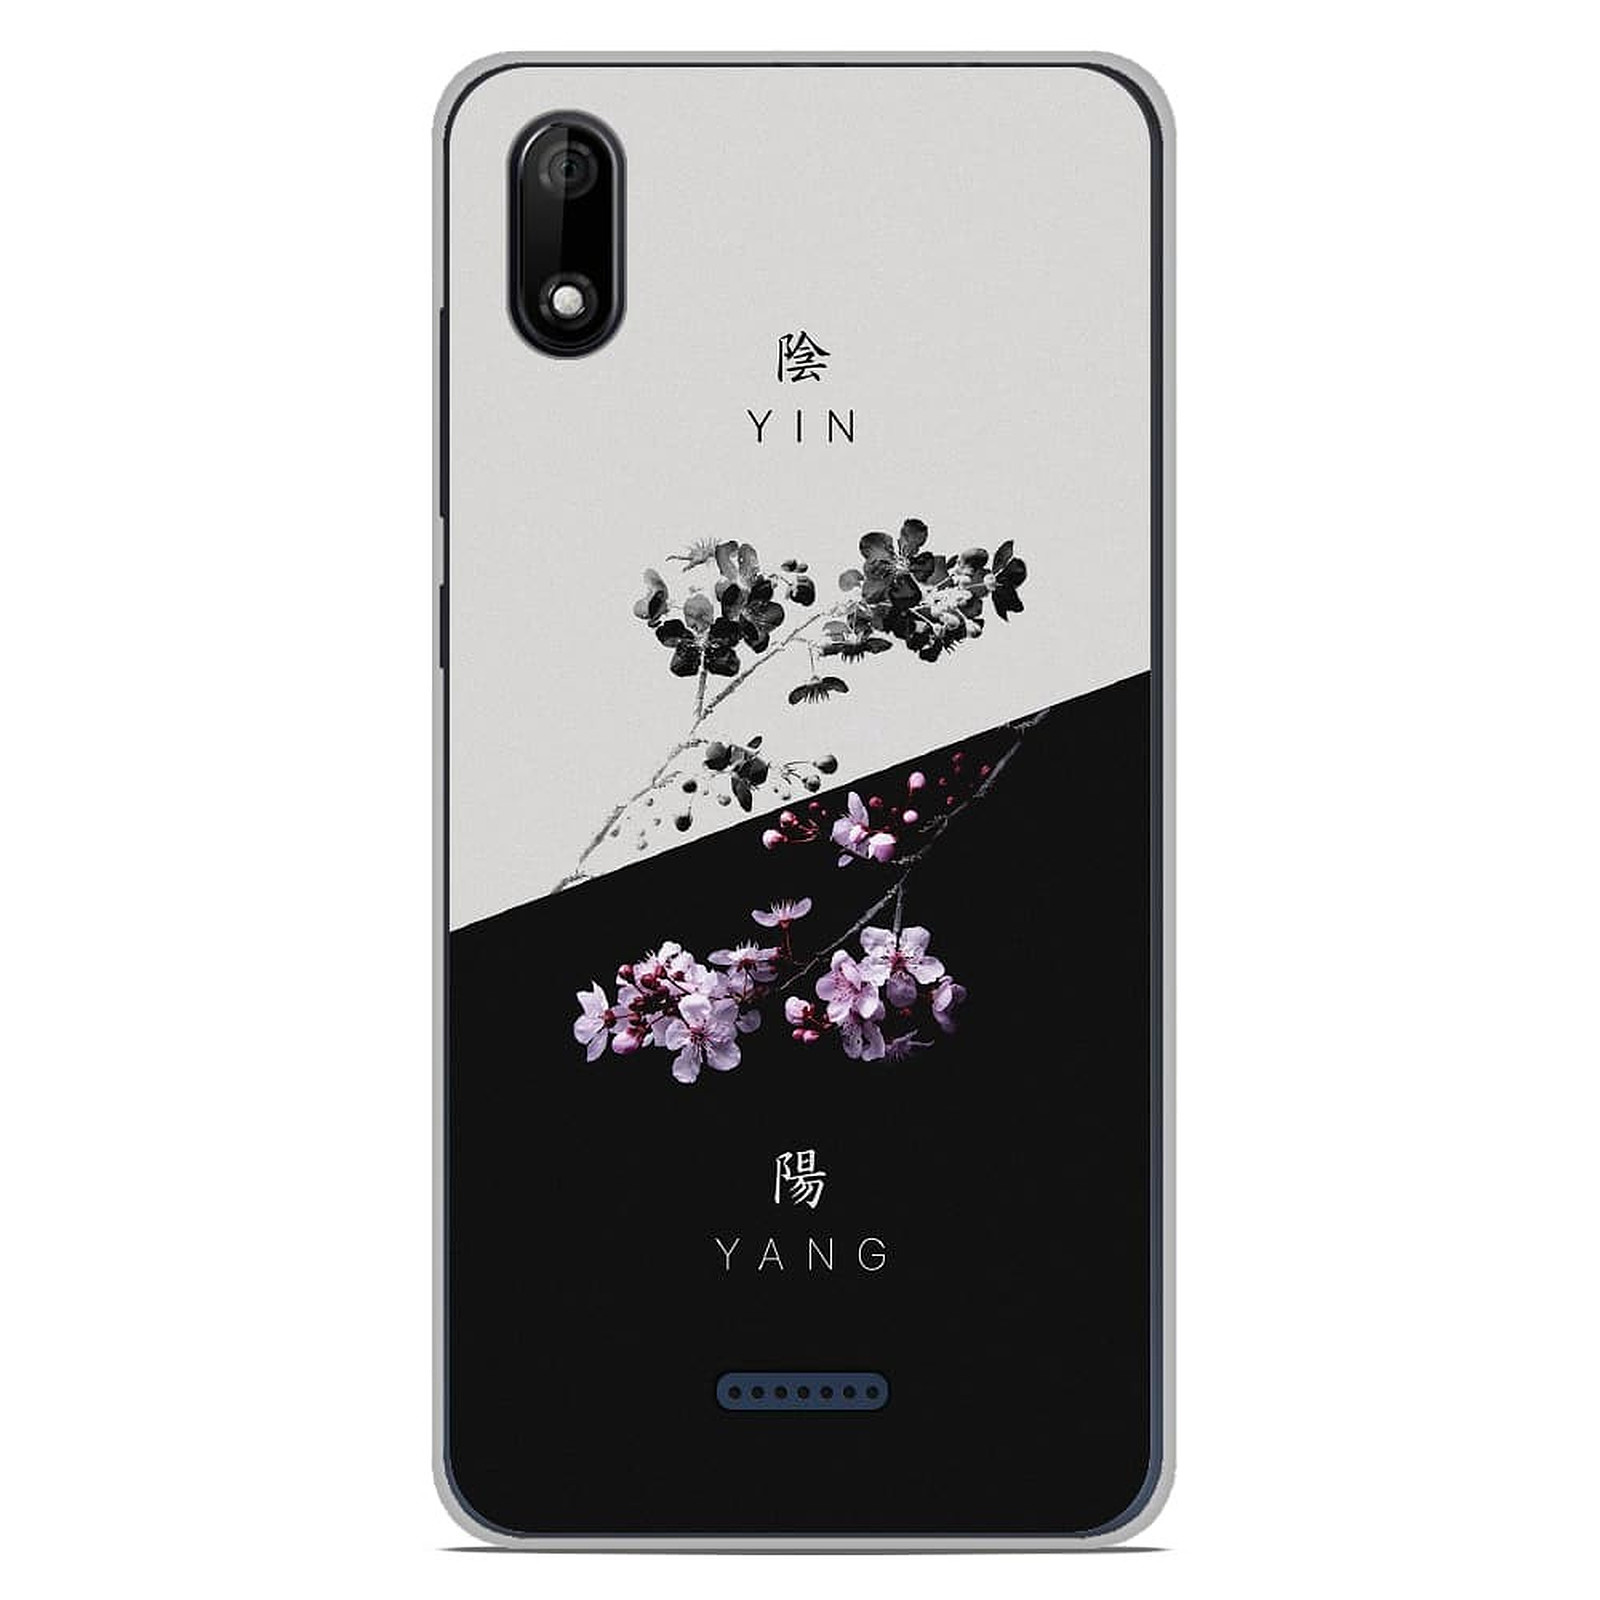 1001 Coques Coque silicone gel Wiko Y50 motif Yin et Yang - Coque telephone 1001Coques